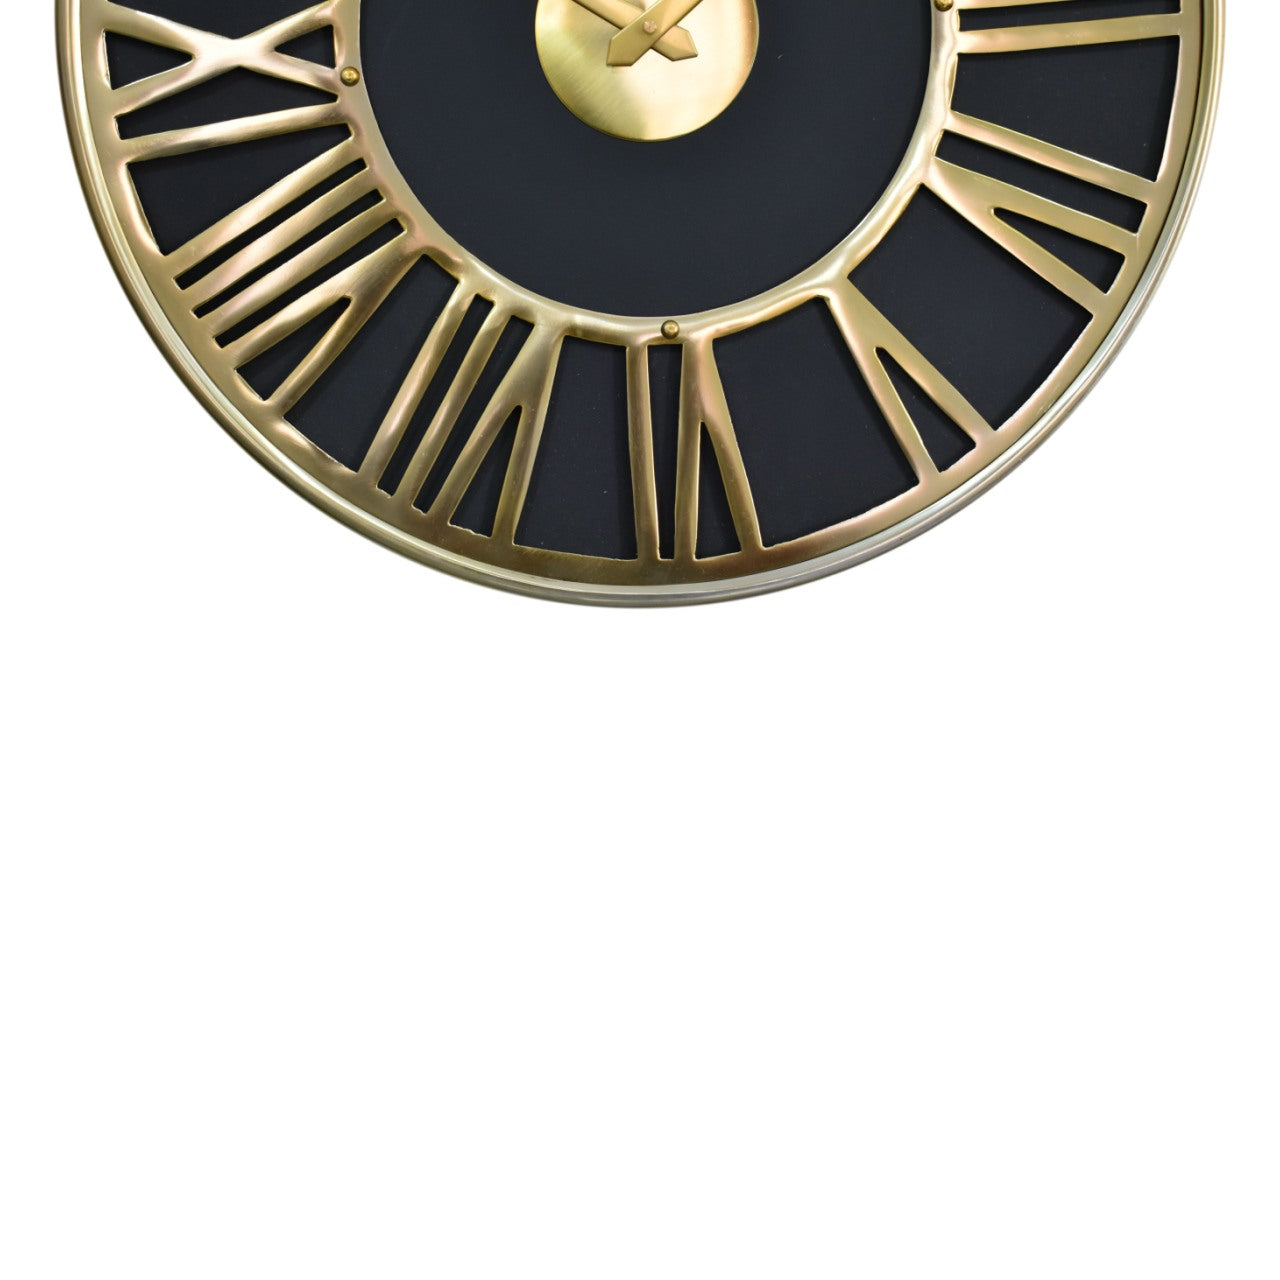 black and gold clock